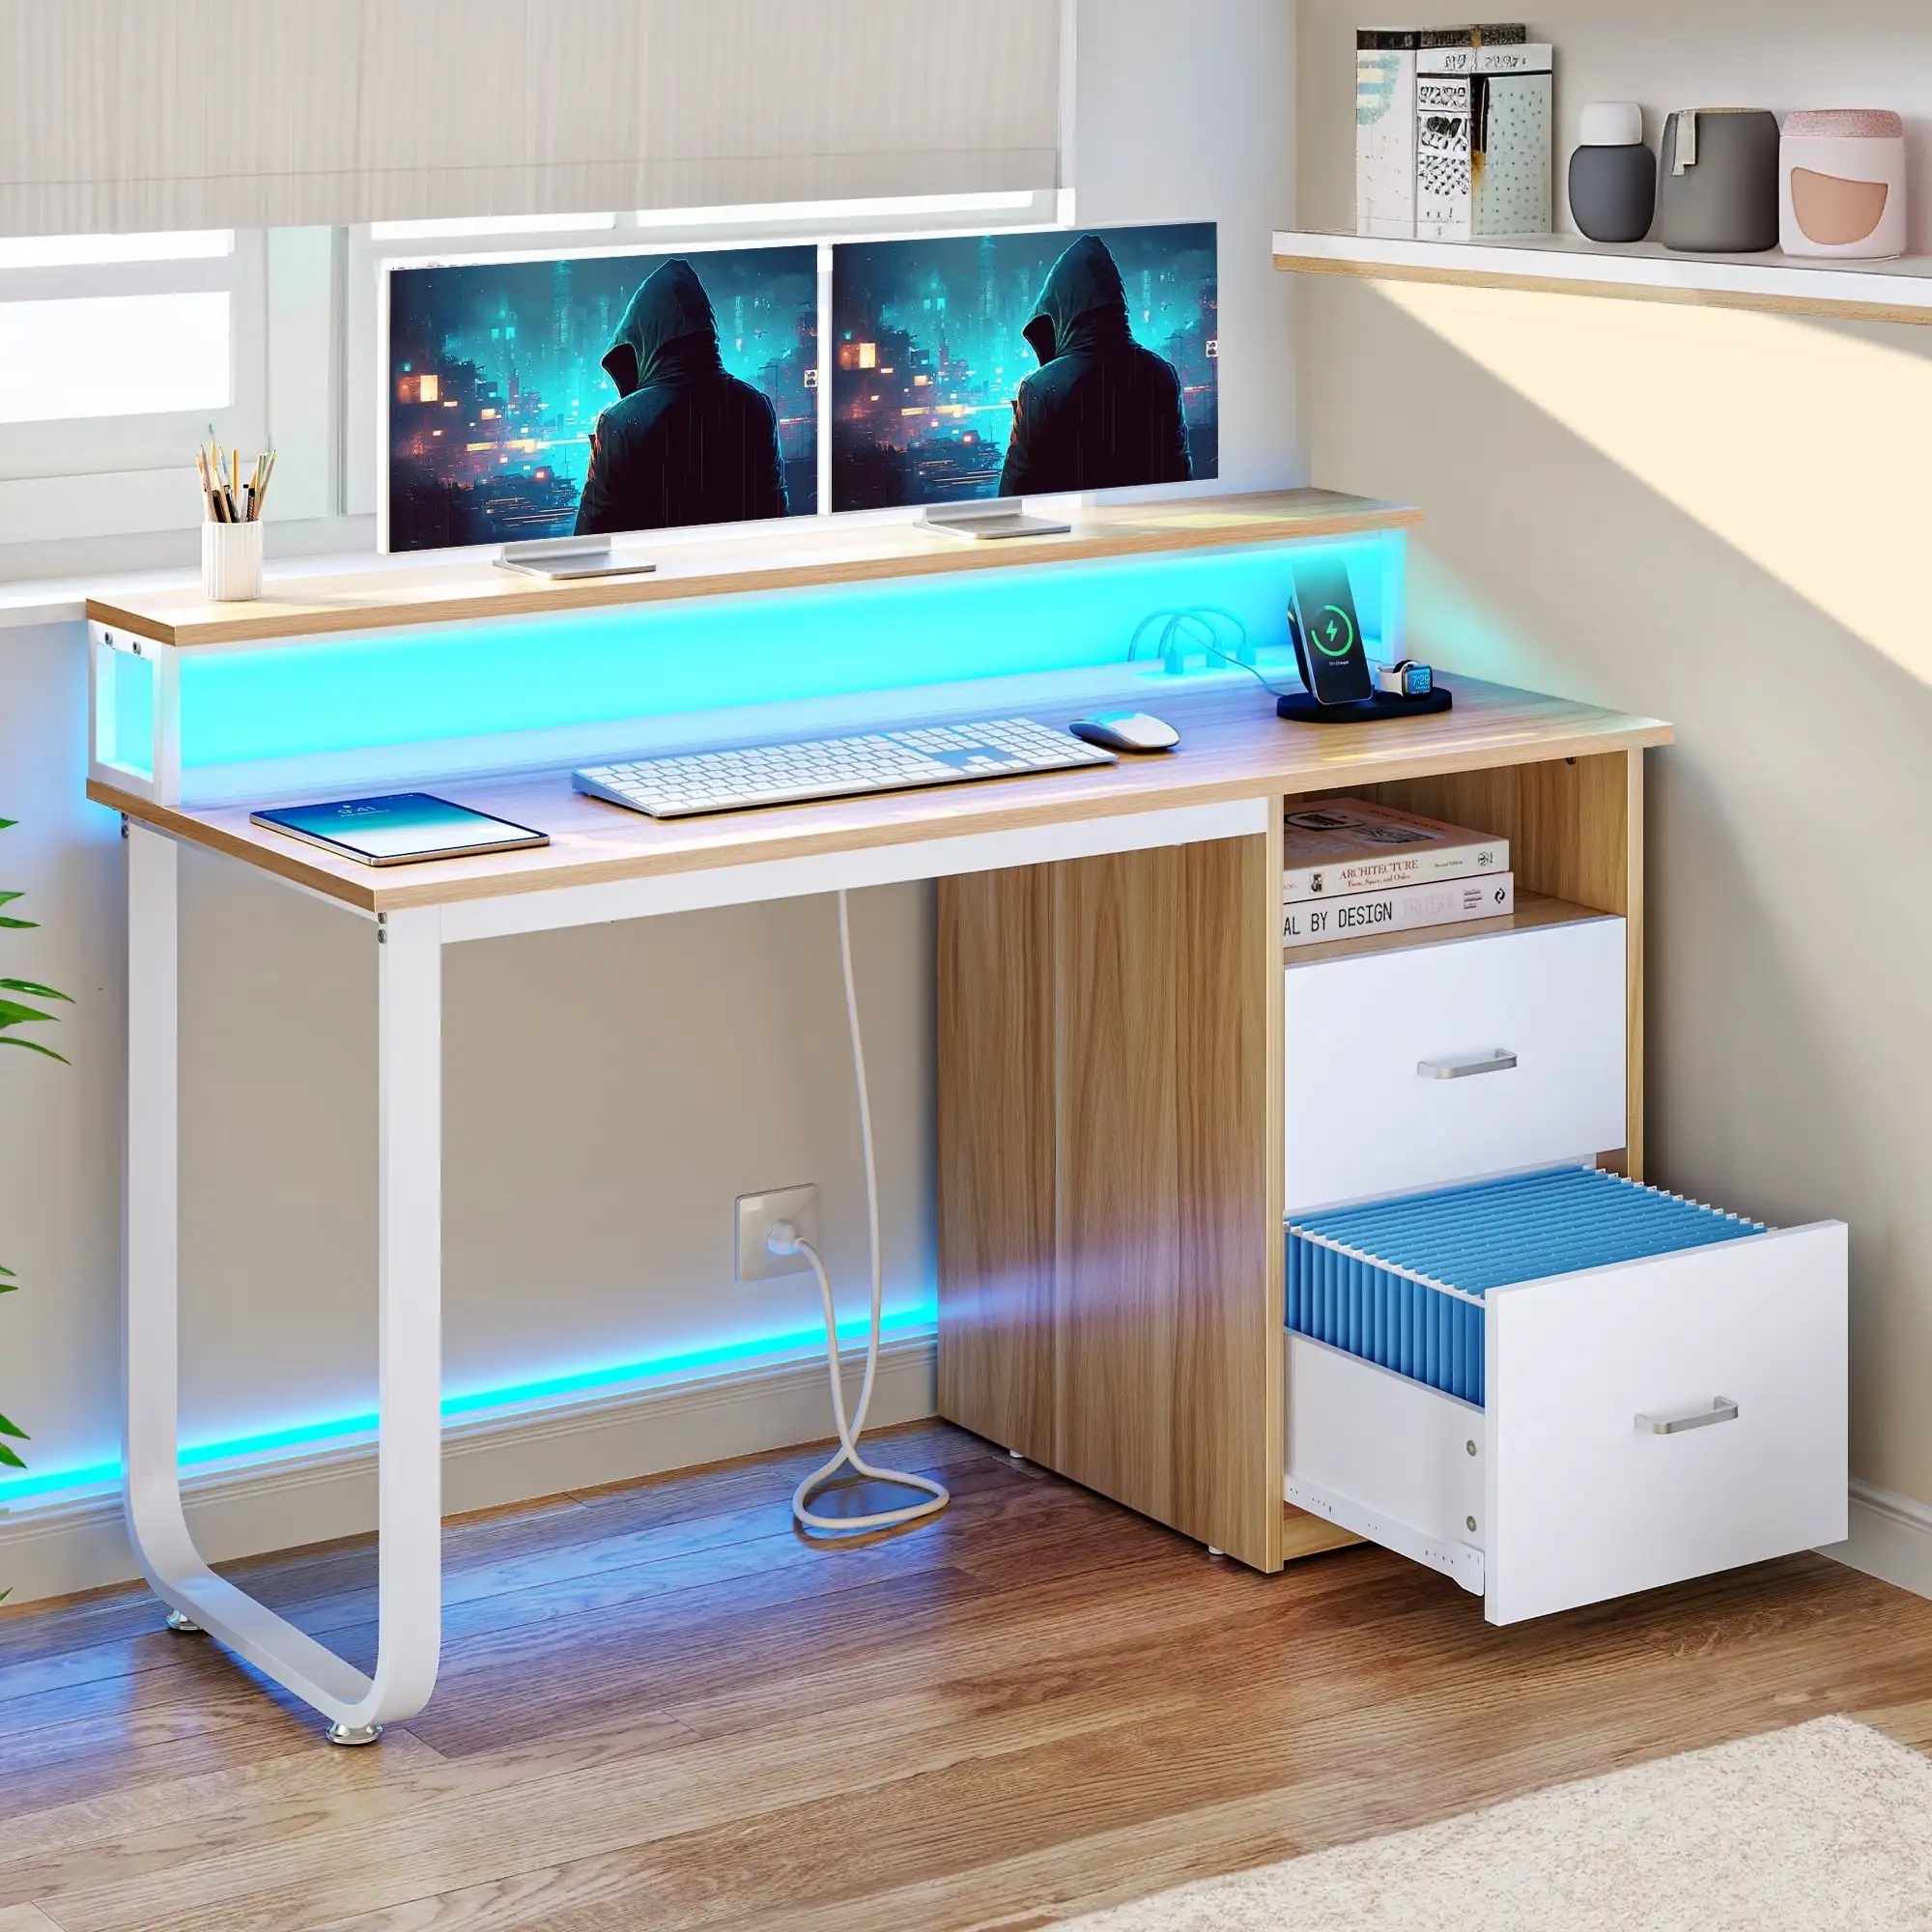 

47 inch Computer Desk with Storage Drawers & LED Light, Office Desk with Monitor Stand & Power Outlets, Work Study PC Desk, Oak